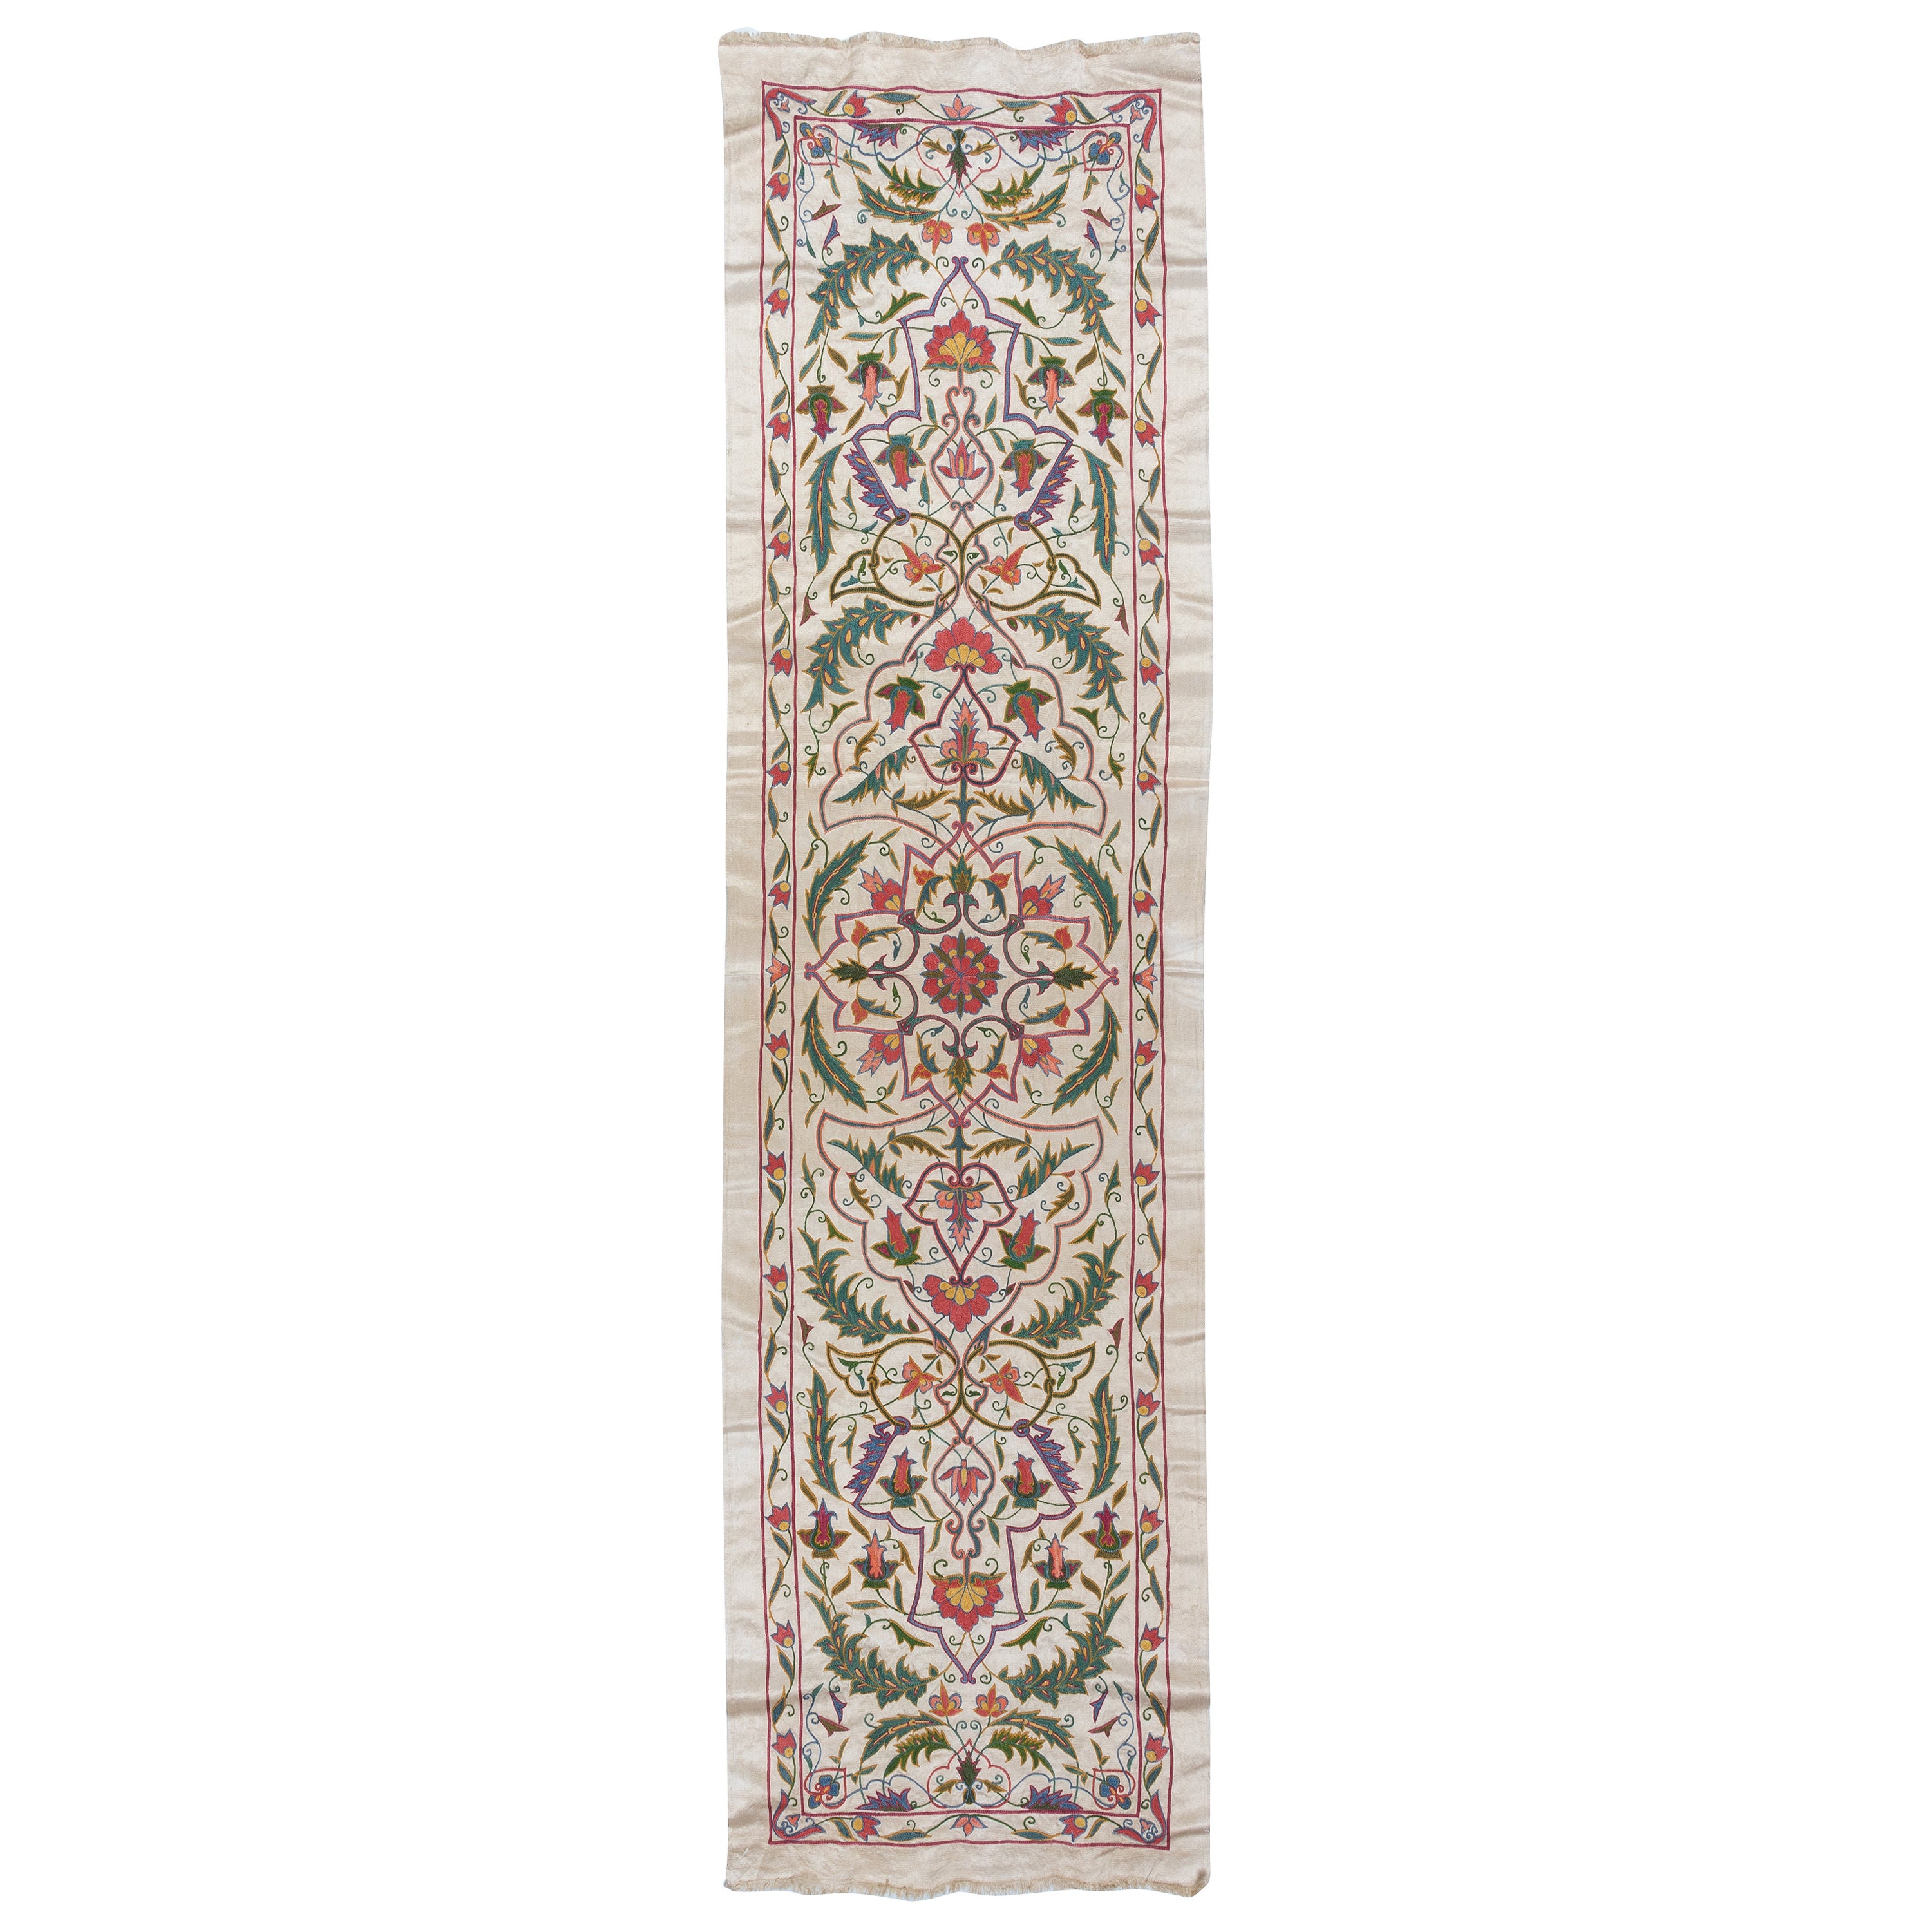 1.7x6.4 ft Embroidered All Silk Runner, Suzani Wall Hanging, Uzbek Bedspread For Sale